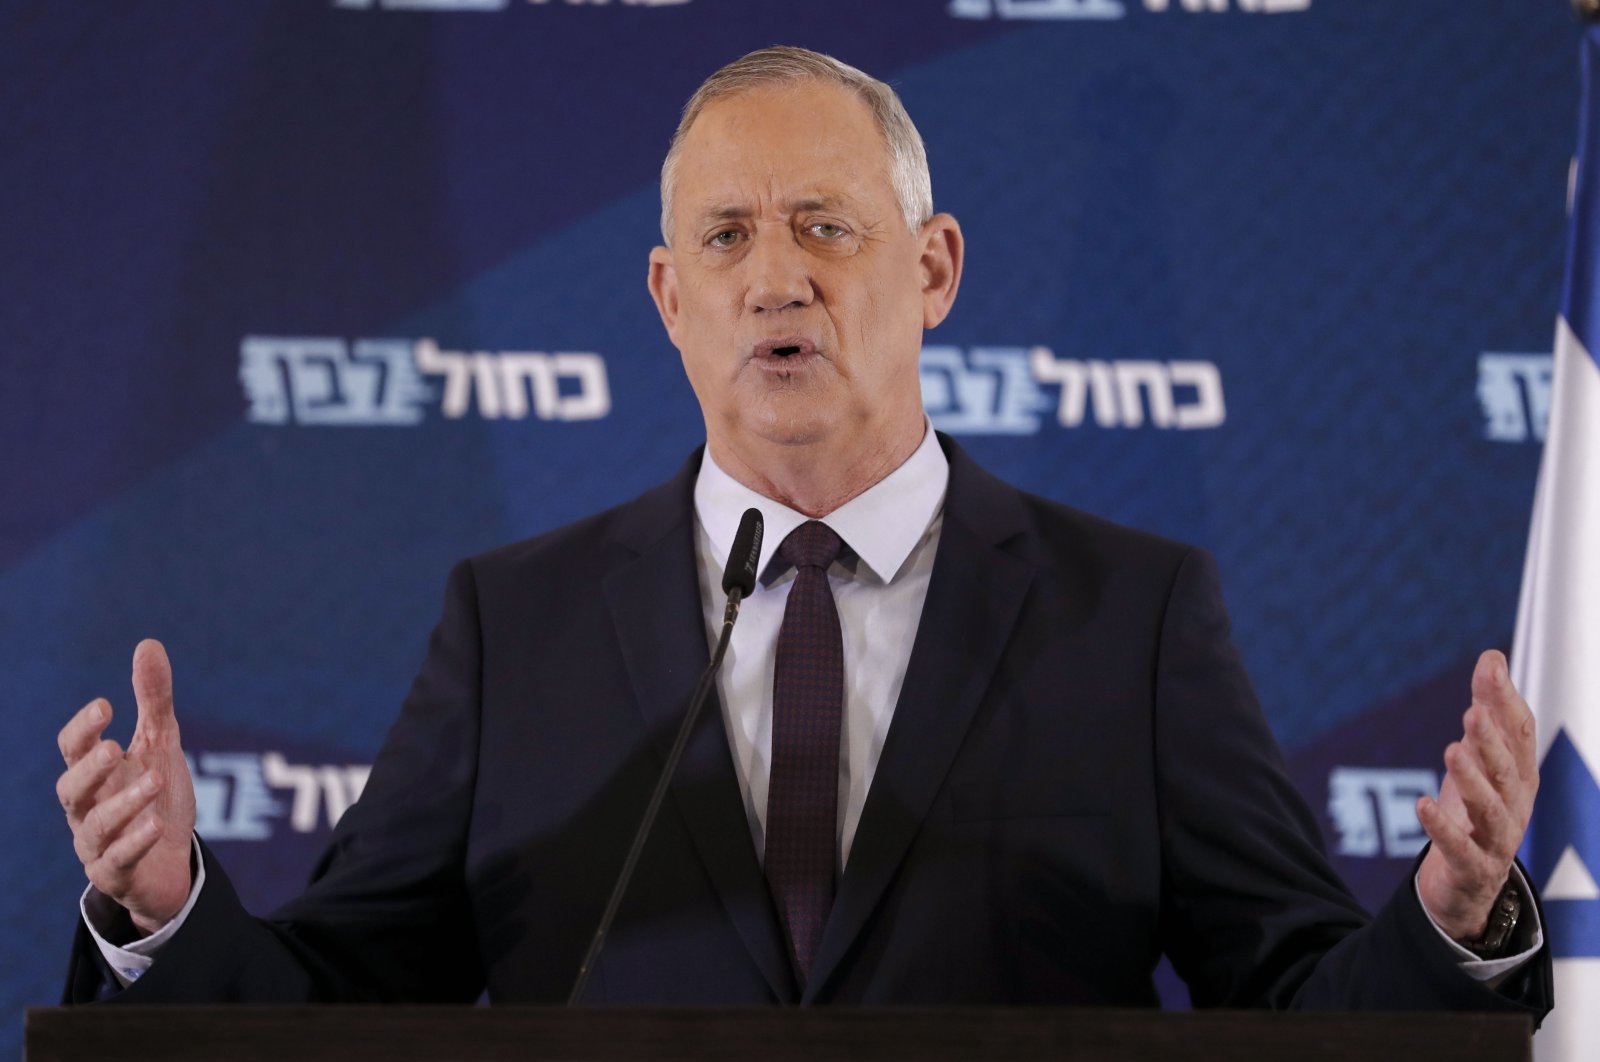 Israel's Blue and White electoral alliance leader Benny Gantz delivers a statement in the central Israeli city of Ramat Gan, March 7, 2020. (AFP Photo)